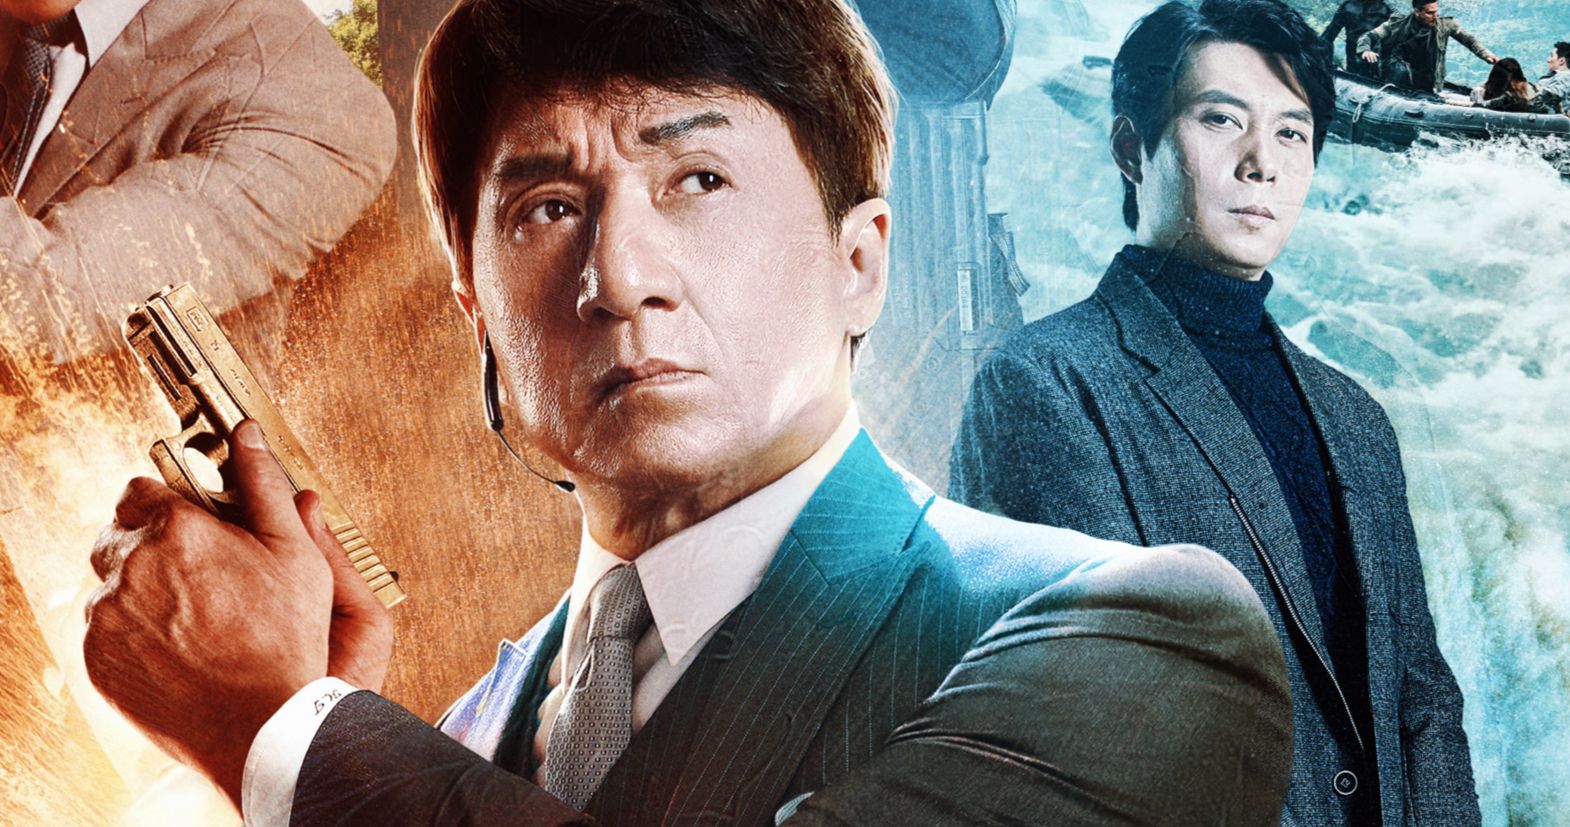 Vanguard Trailer Brings Action Legend Jackie Chan to Theaters This Thanksgiving